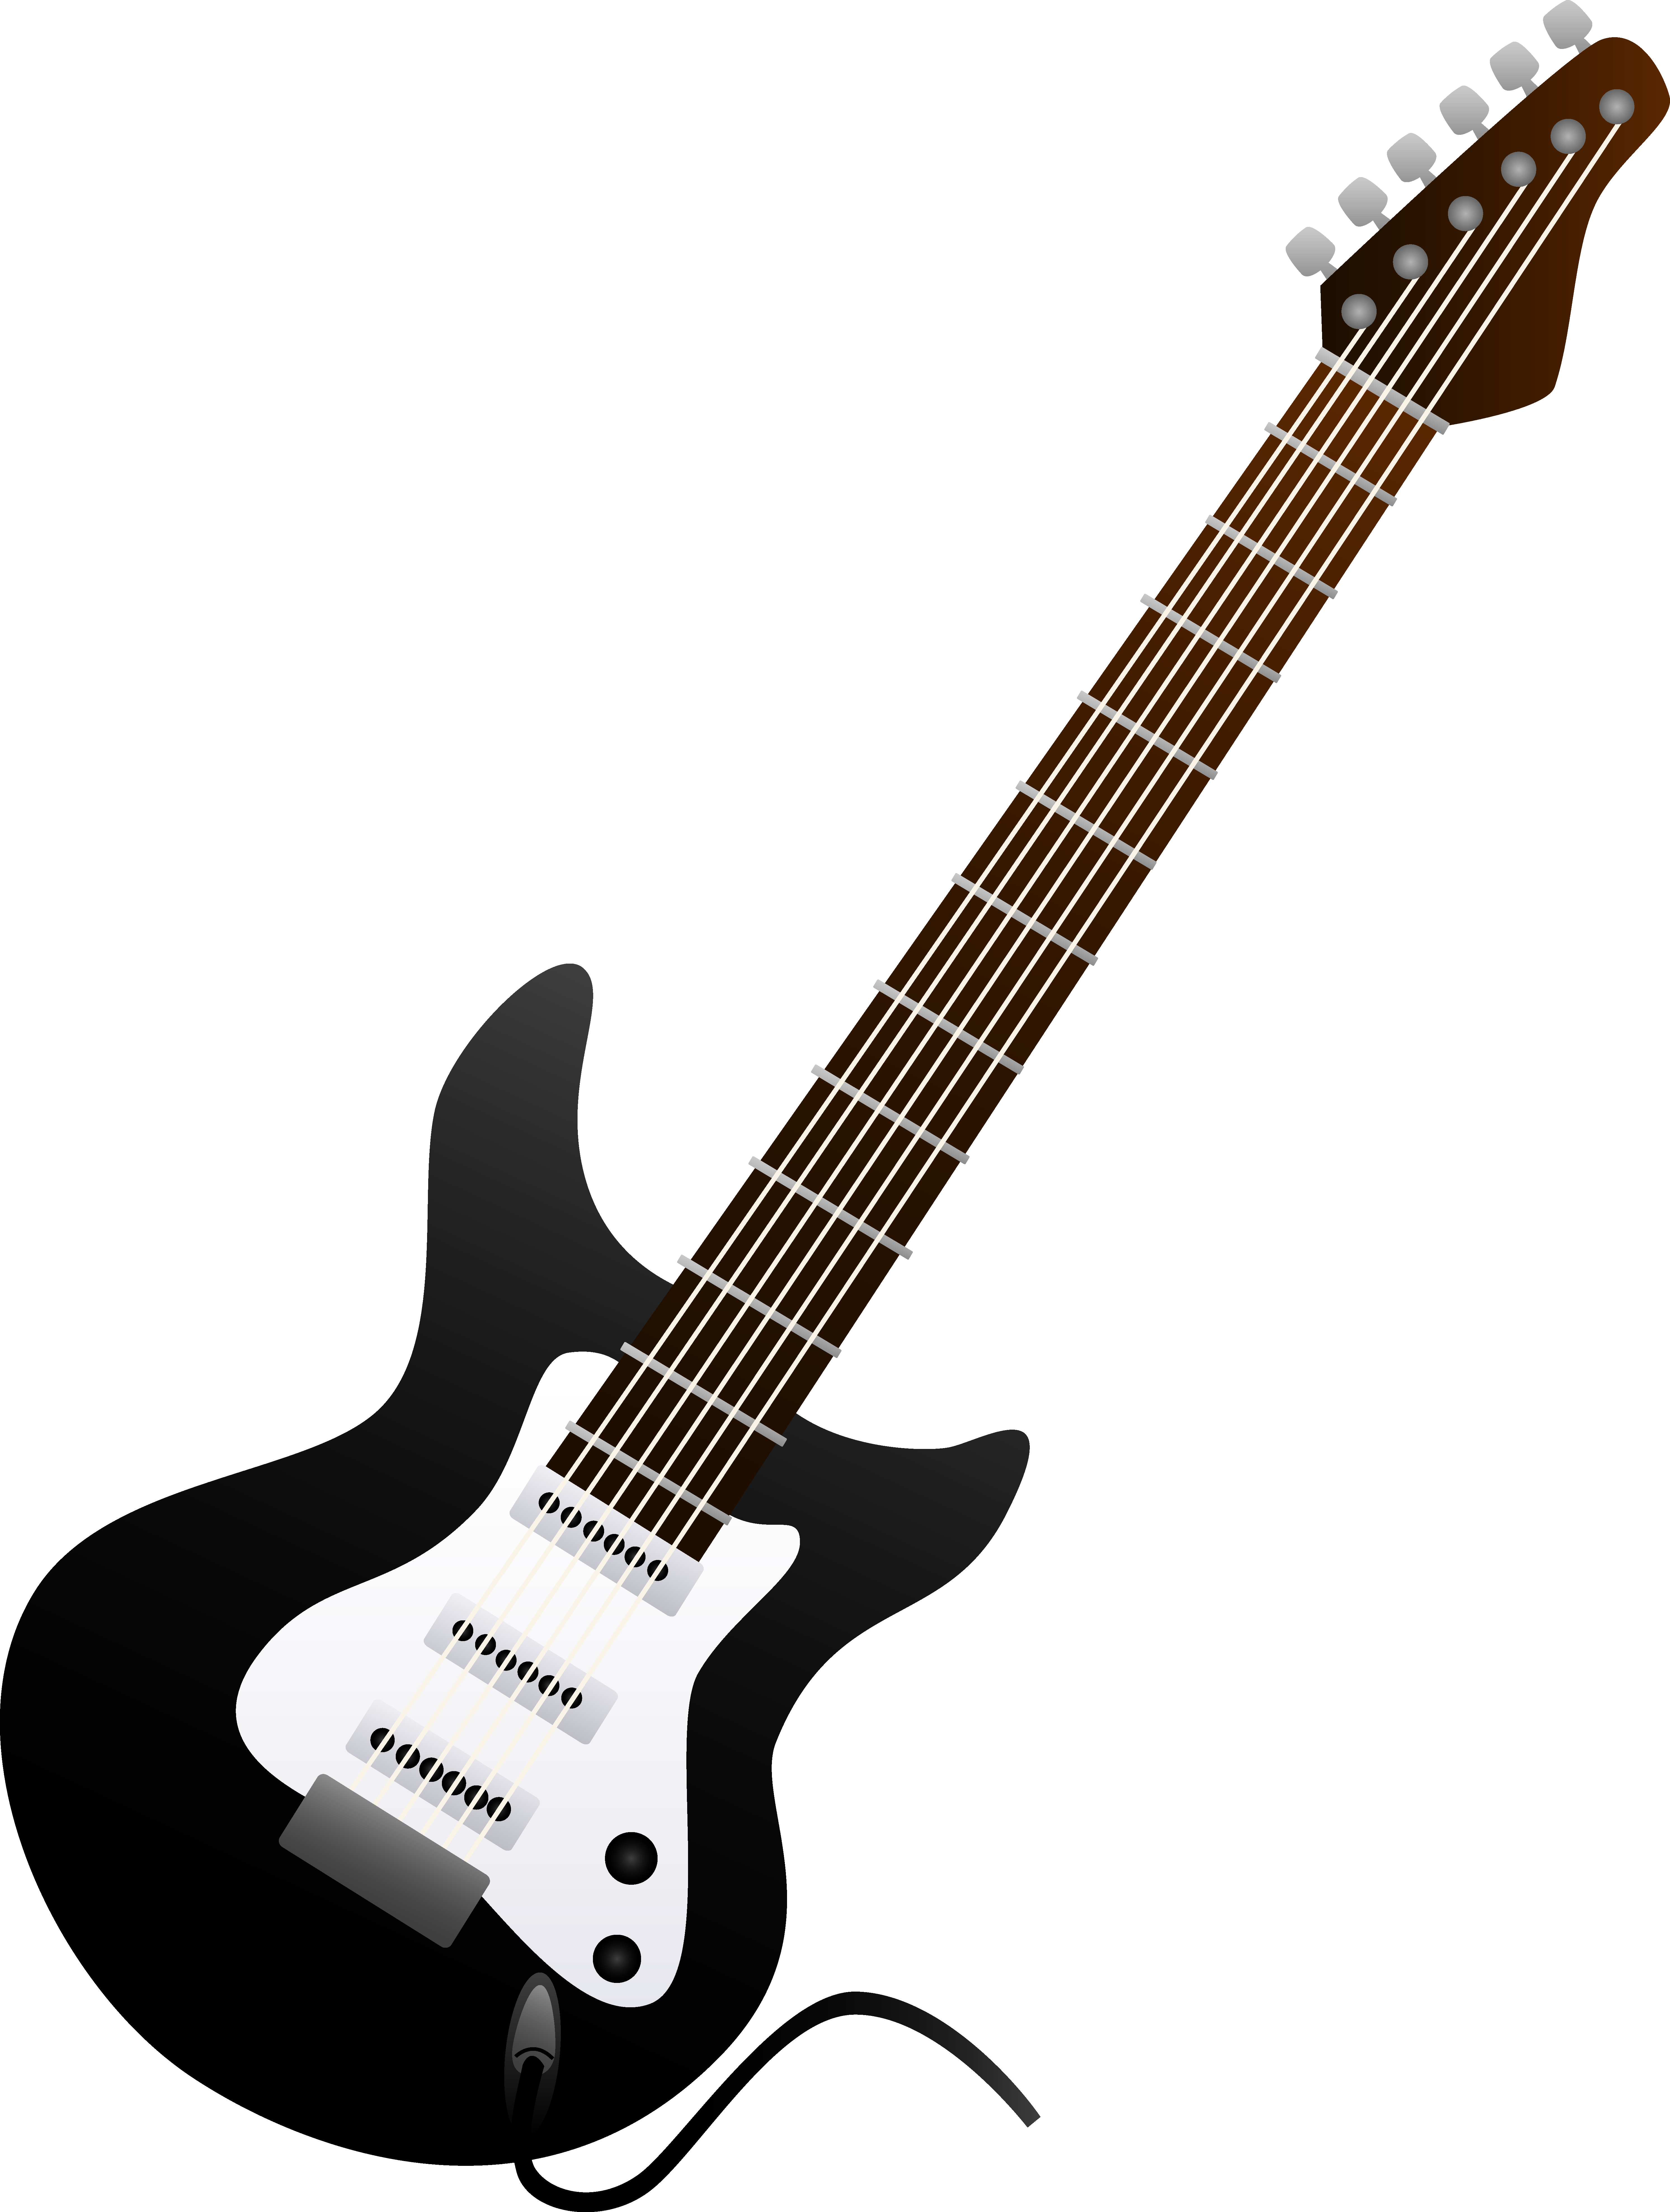 Black Electric Guitar Design - Black And White Electric Guitar Drawing (5971x7908)